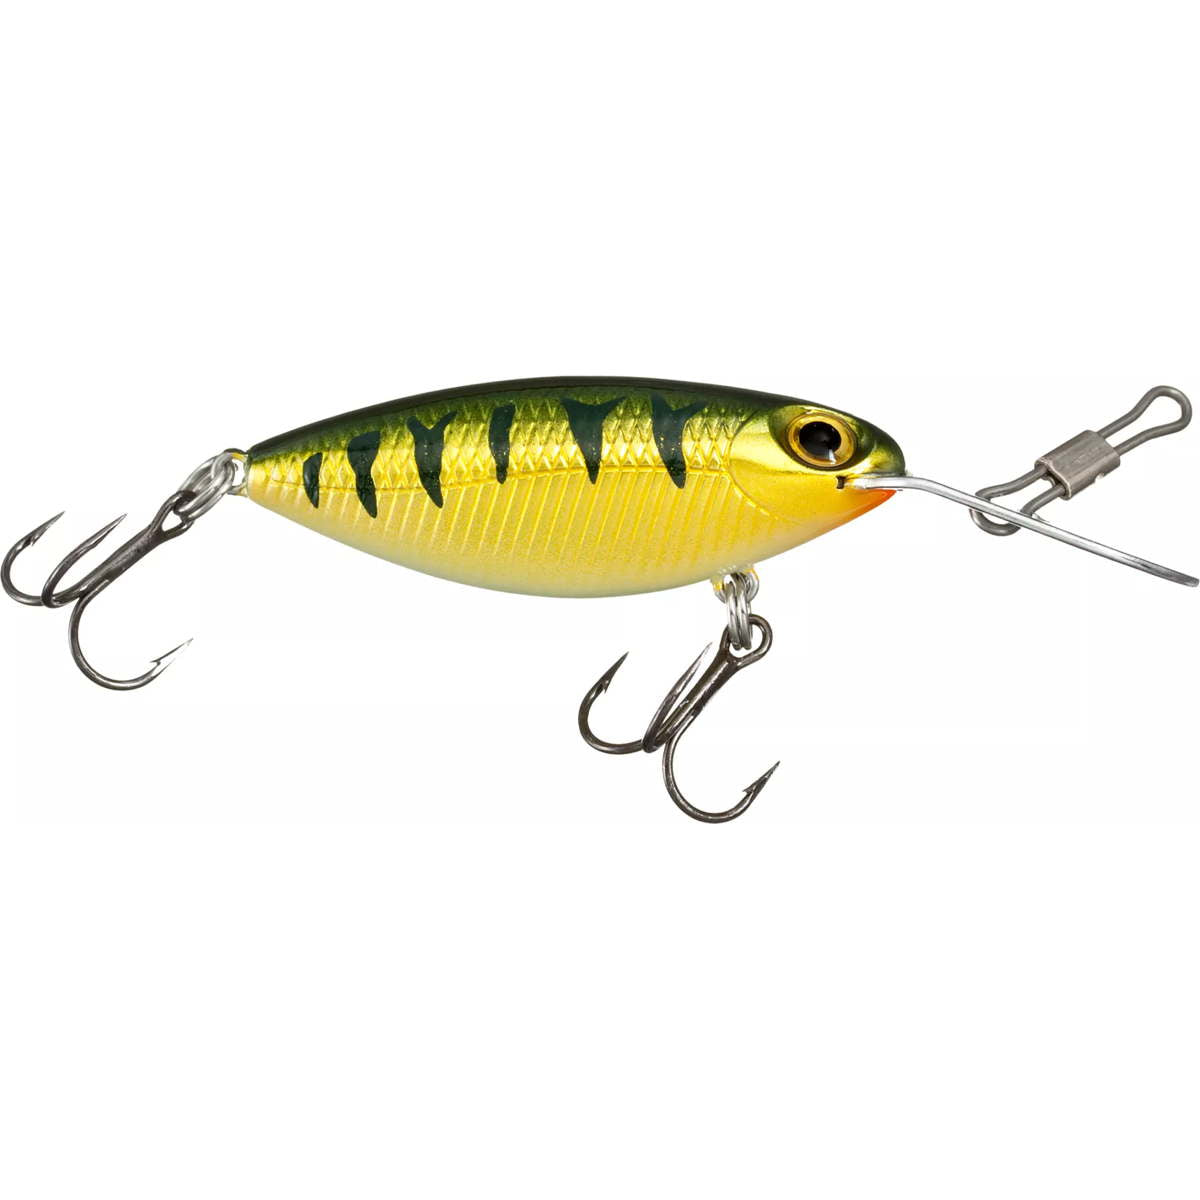 Photo of Storm Hot 'N Tot Madflash for sale at United Tackle Shops.